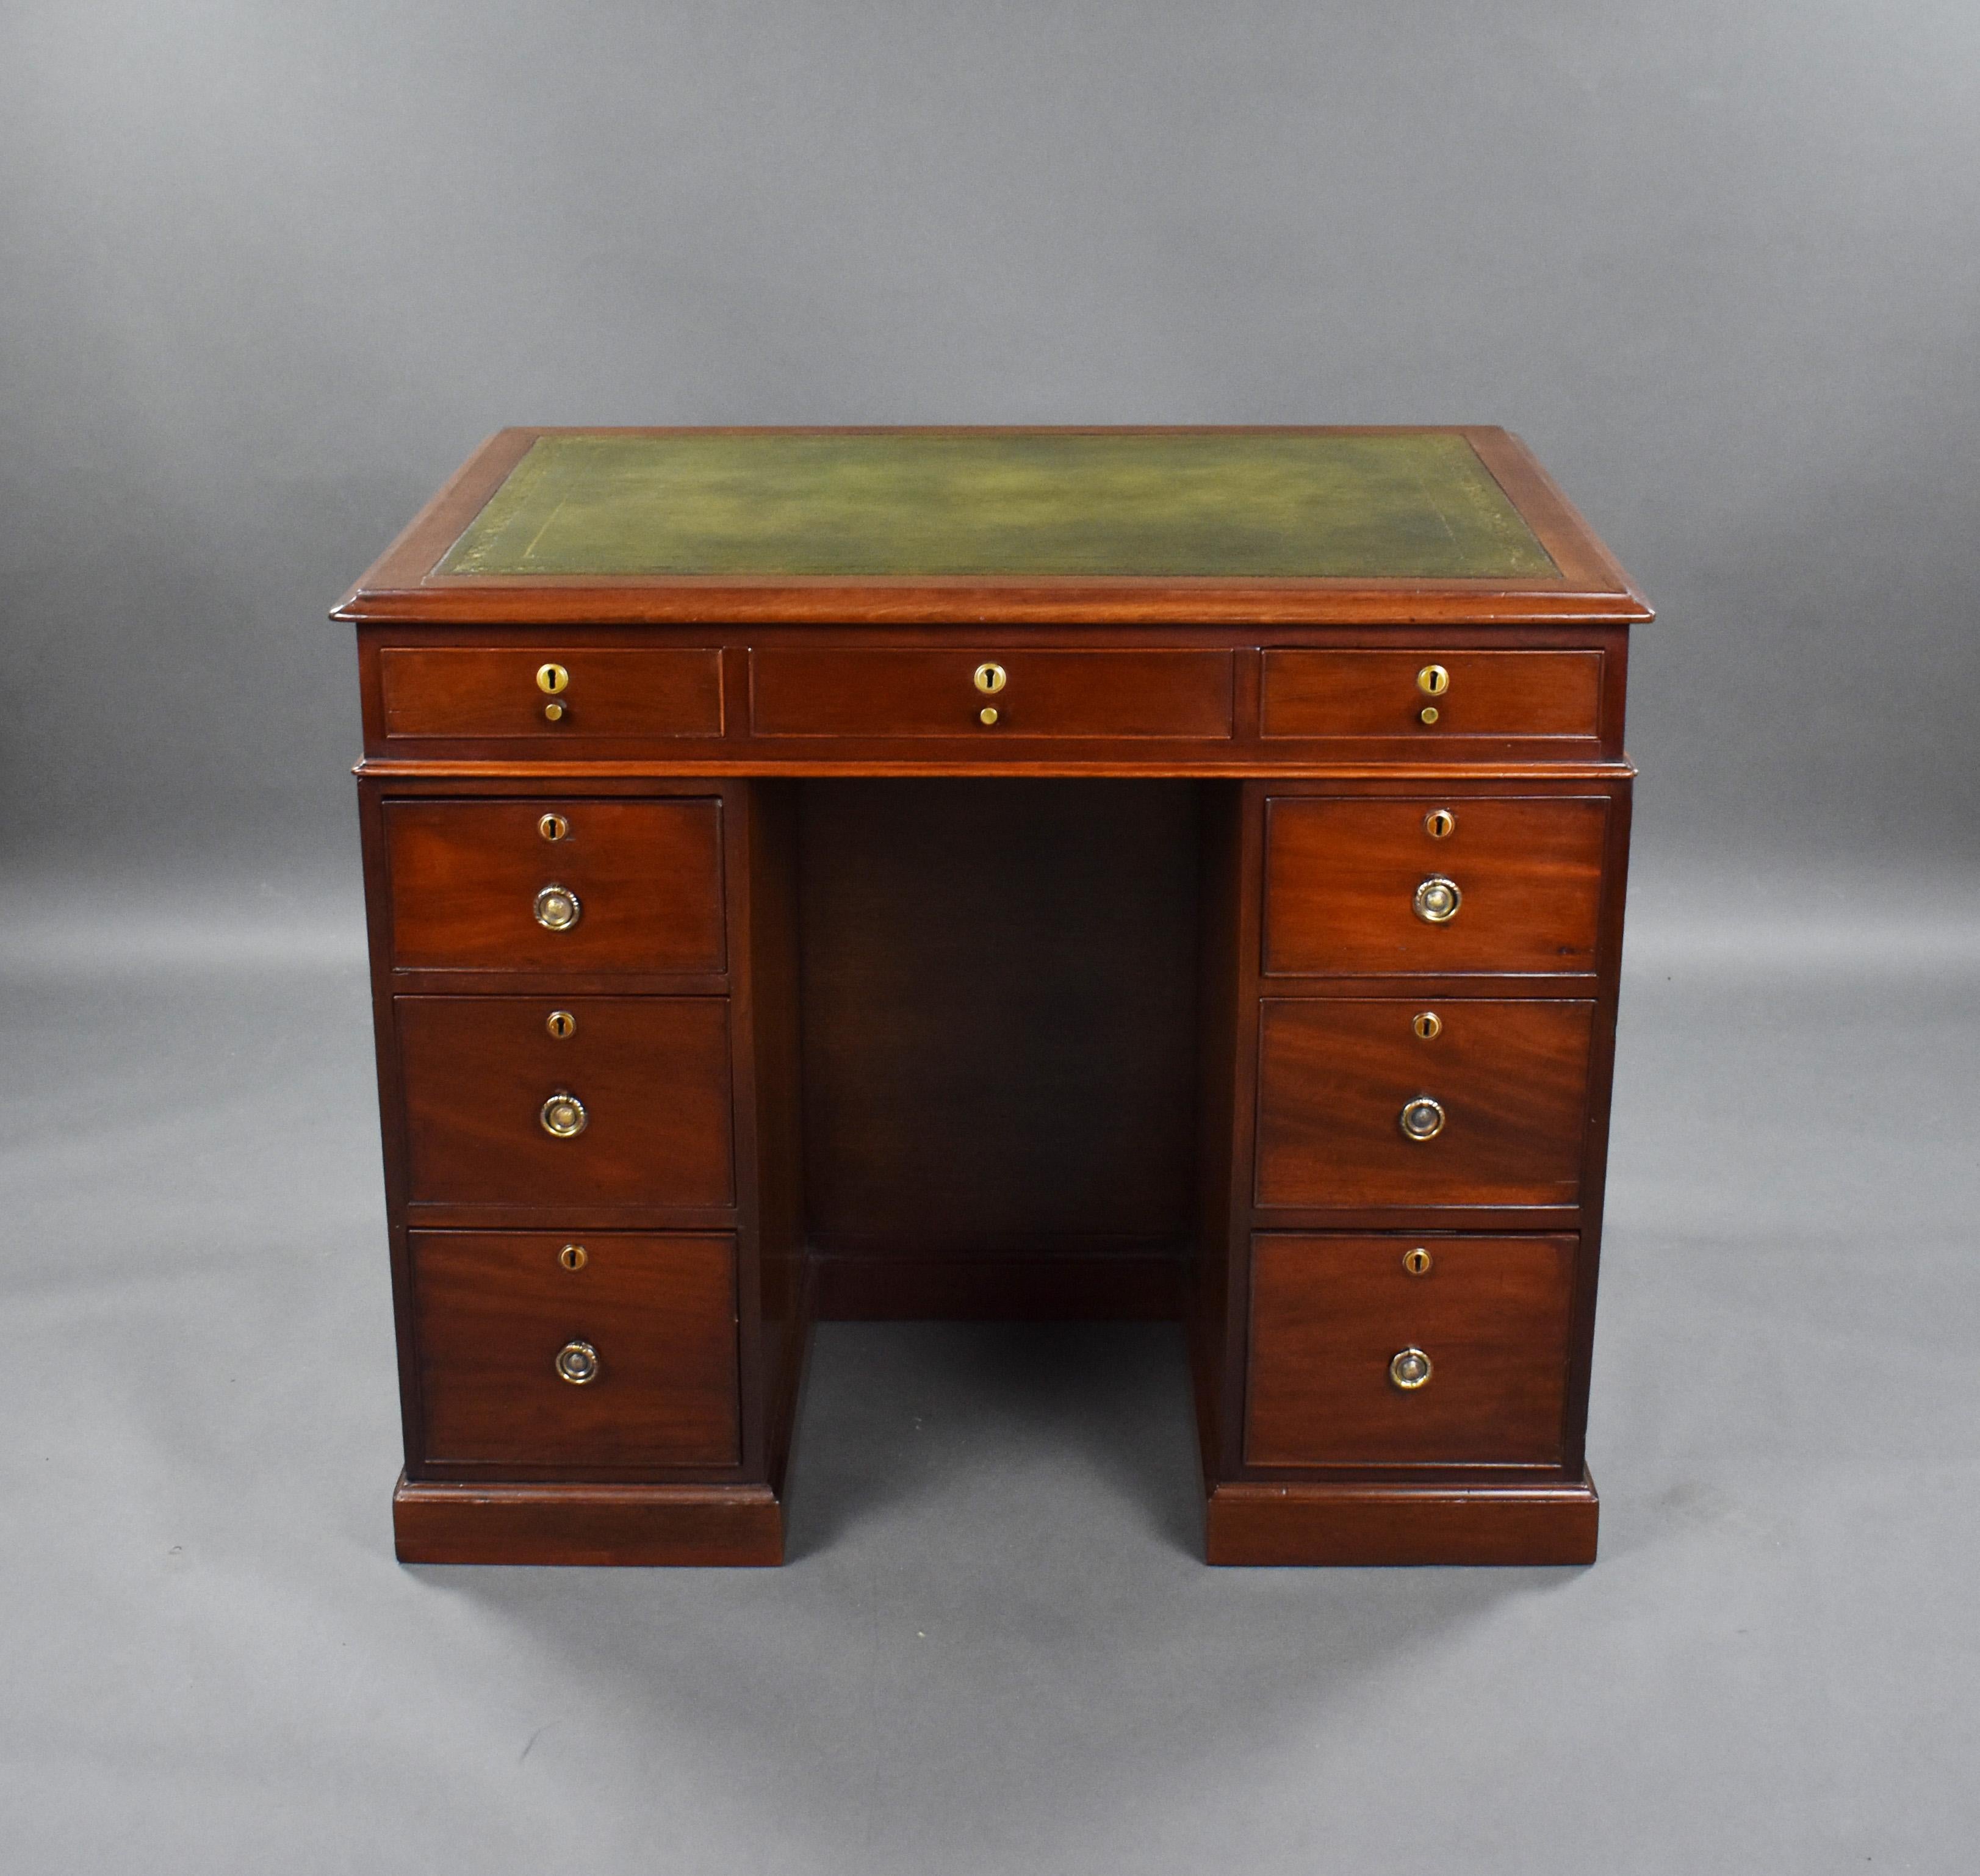 For sale is a good quality George III mahogany kneehole desk stamped Gillows. Having a green leather writing surface, decorated with gold tooling, above three drawers with brass knobs and escutcheons over a further three graduated drawers on either